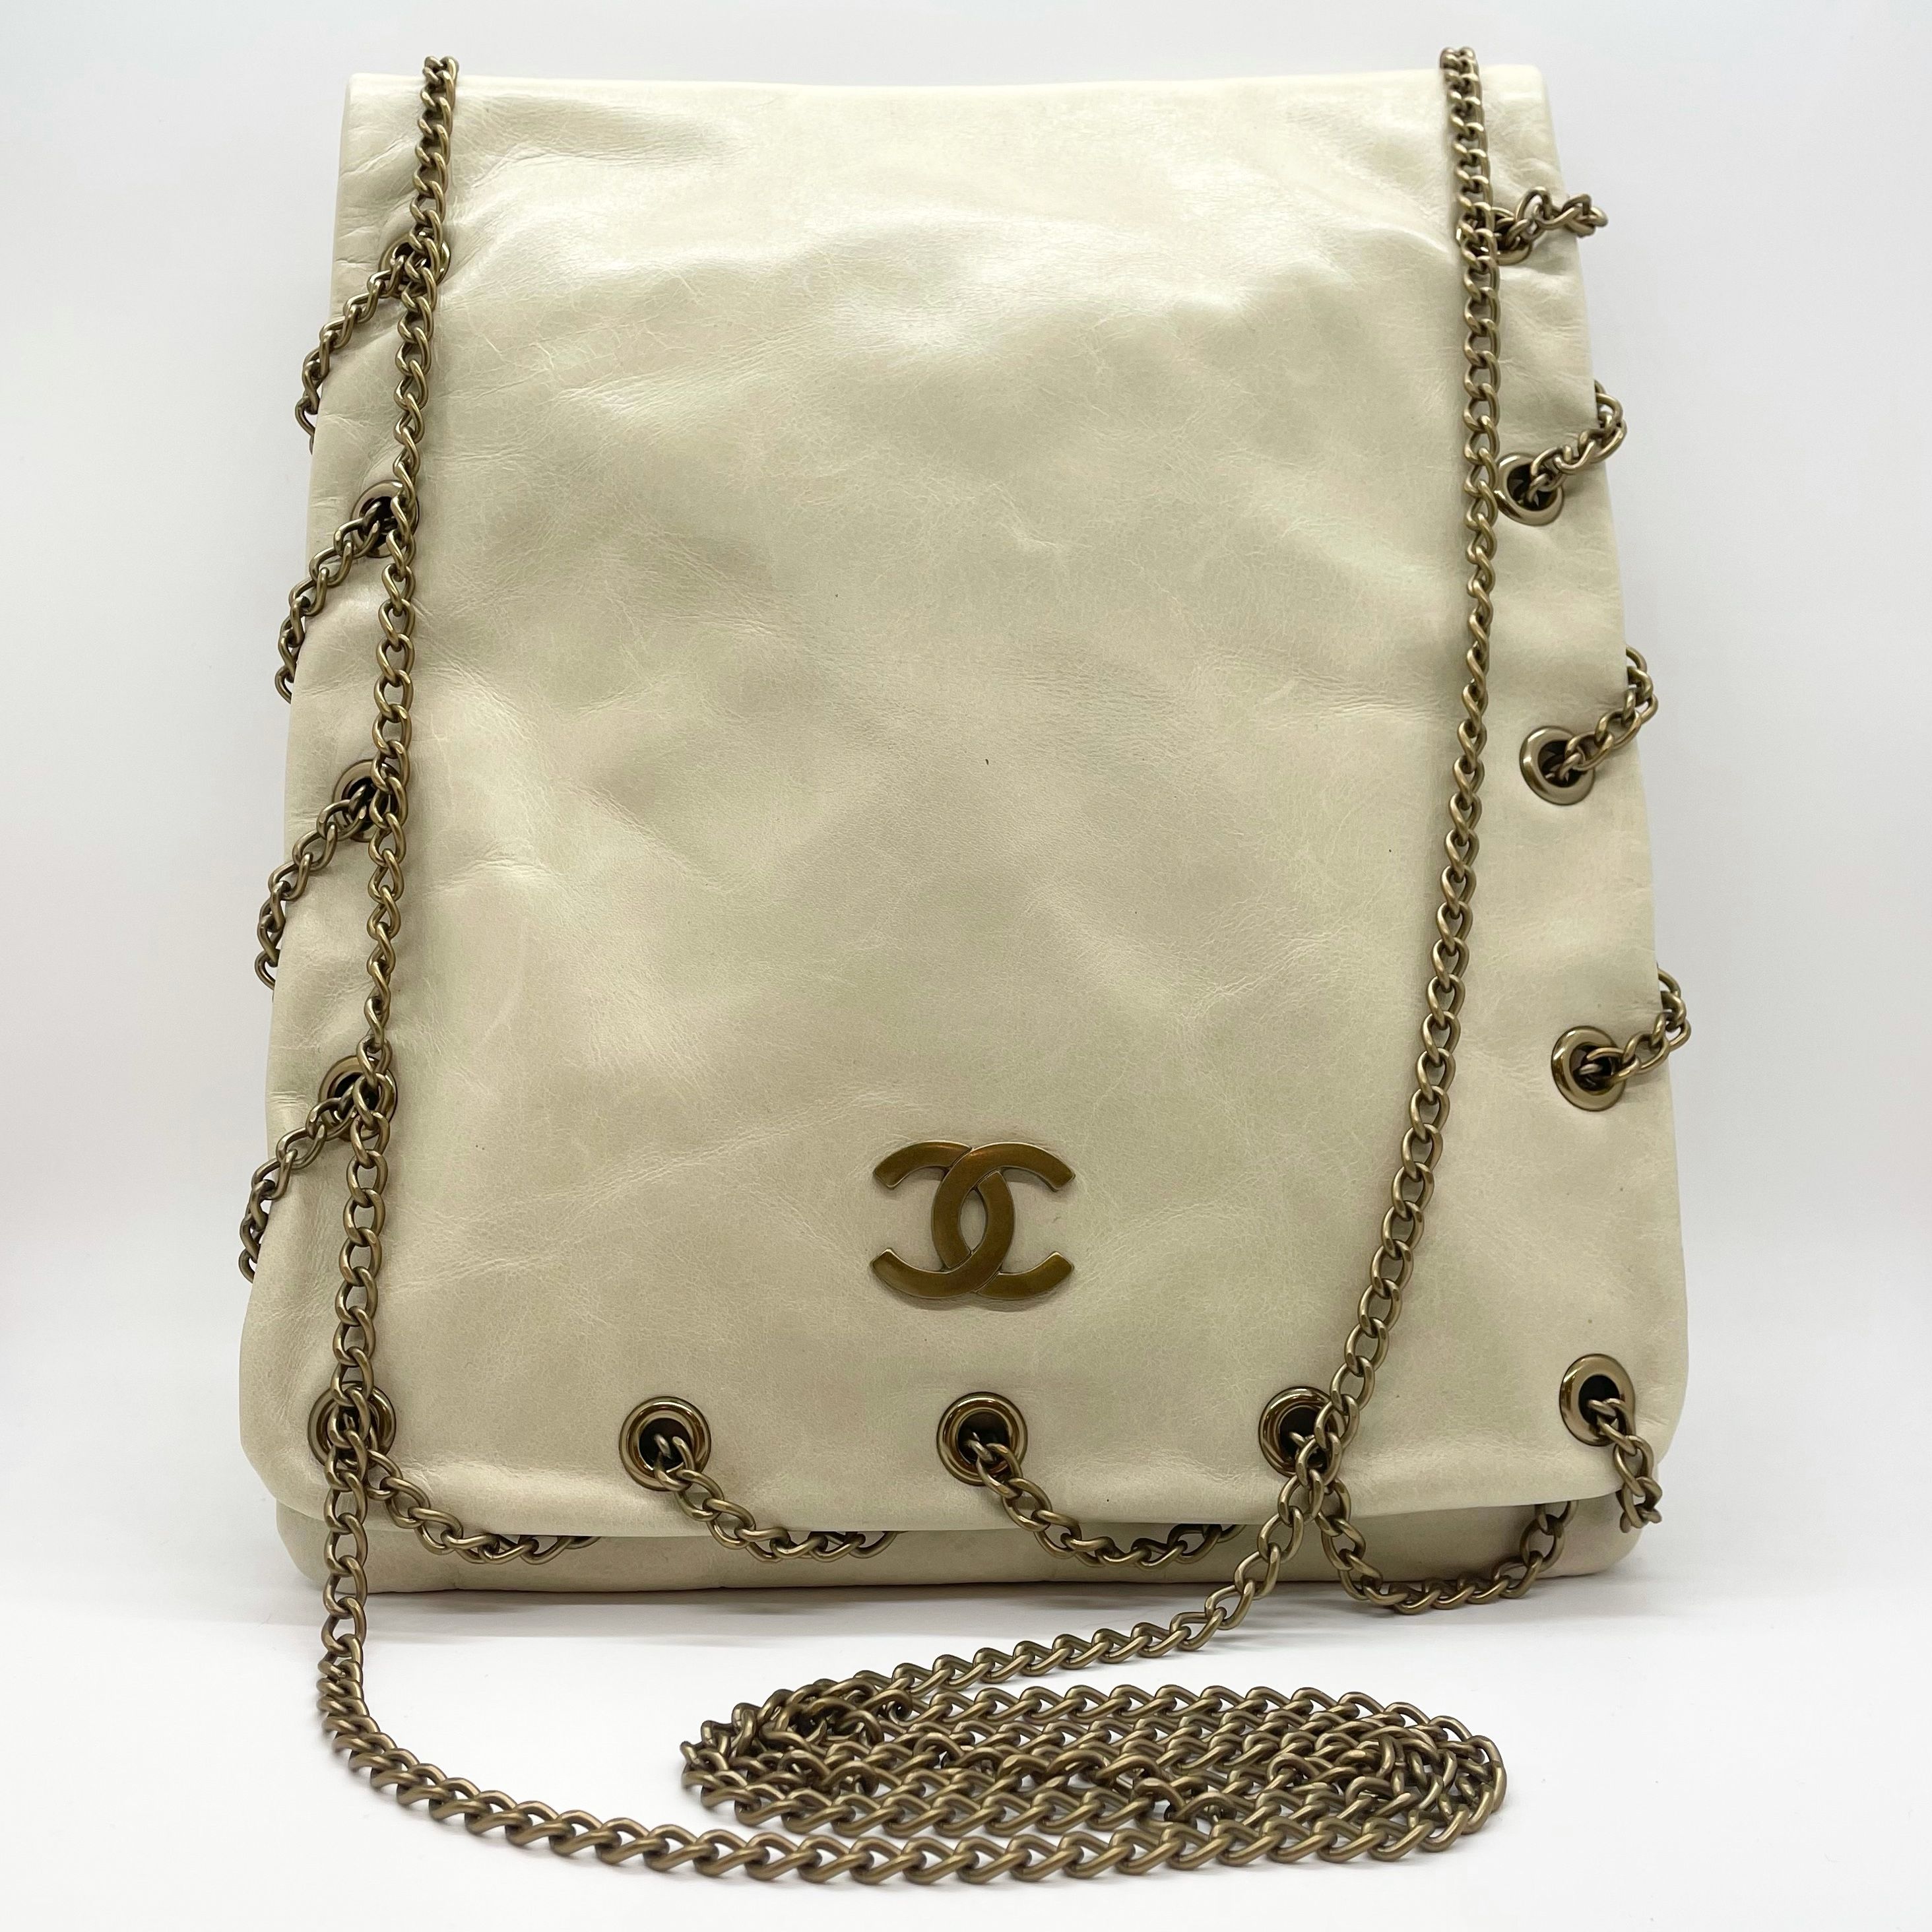 Authentic Chanel Crossbody Bag Pearlescent Winter